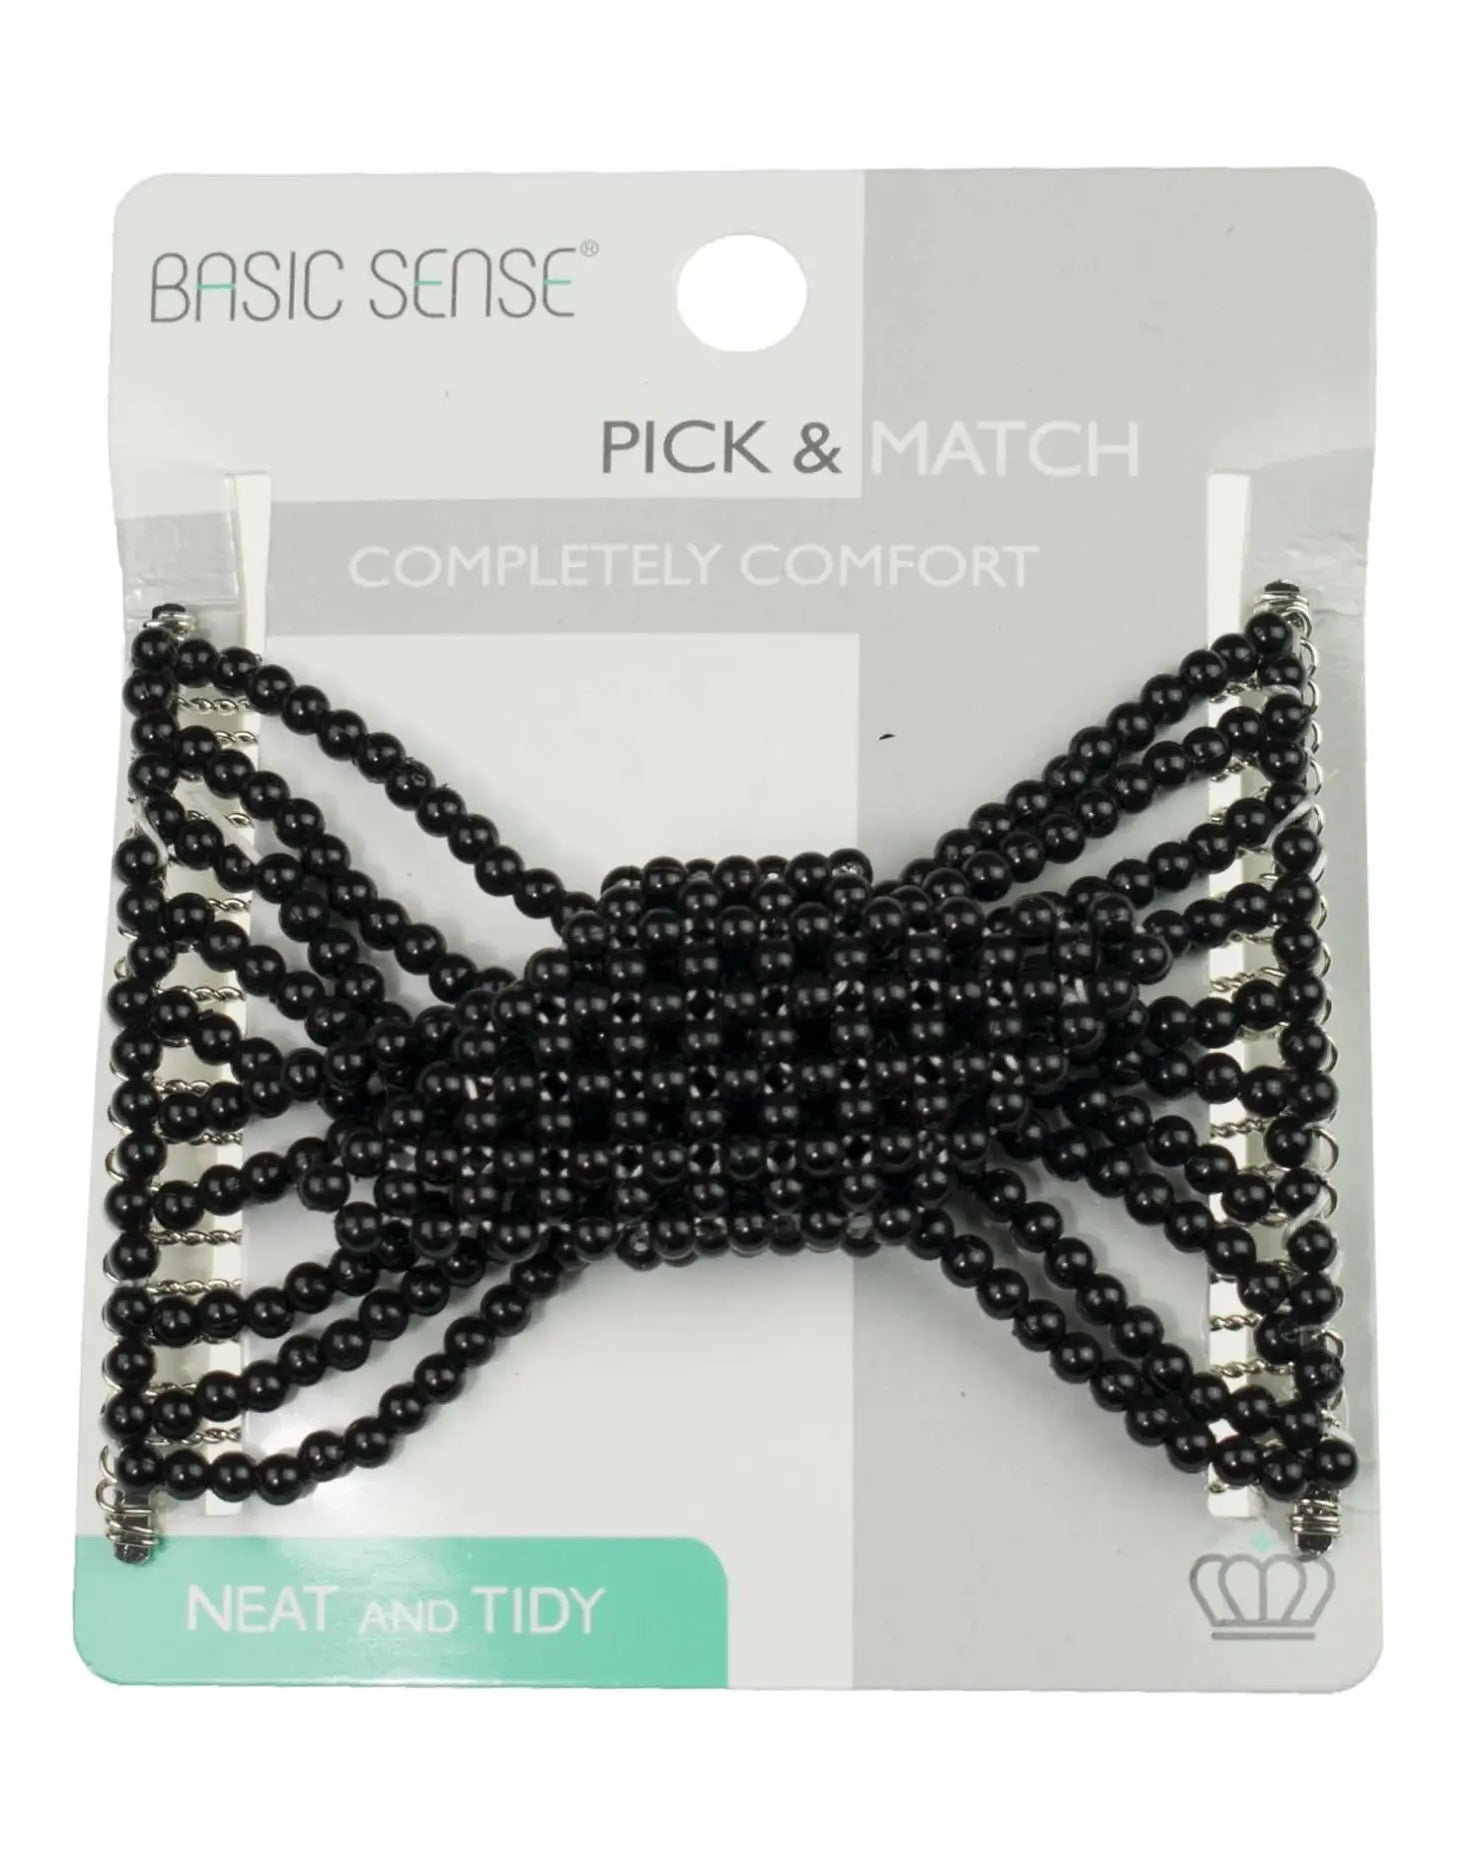 Black bow hair clip displayed on Pearl Beads Hair Combs.